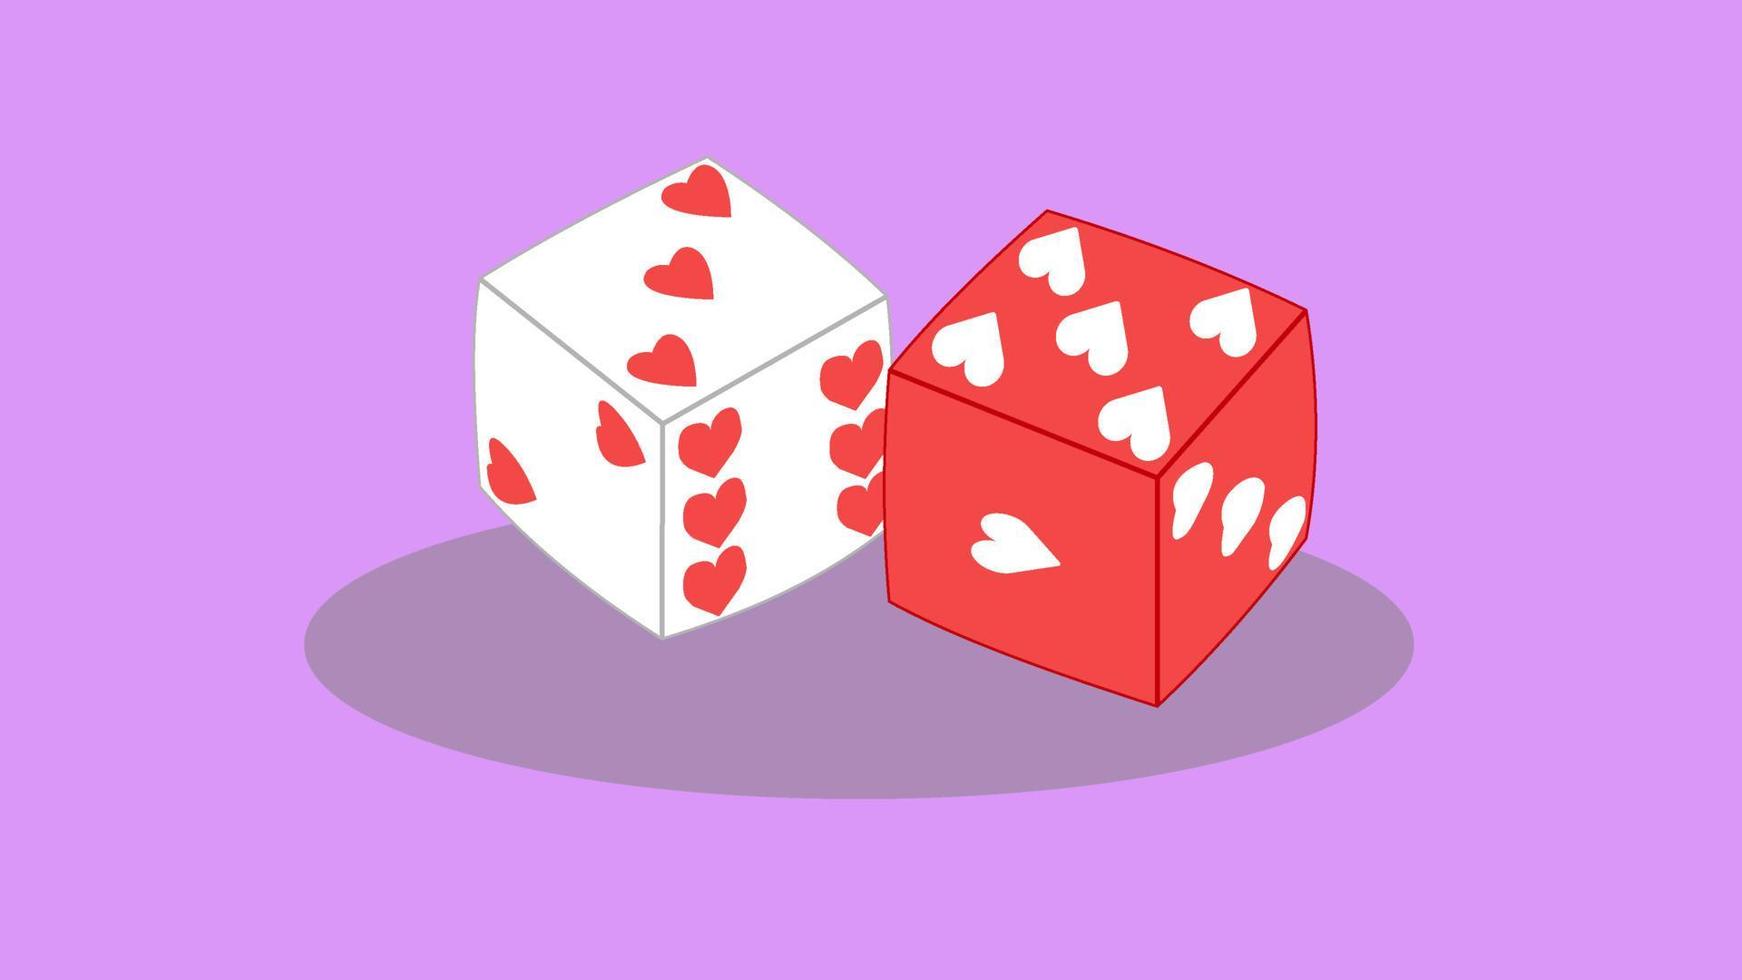 dice white and red flat design illustration vector